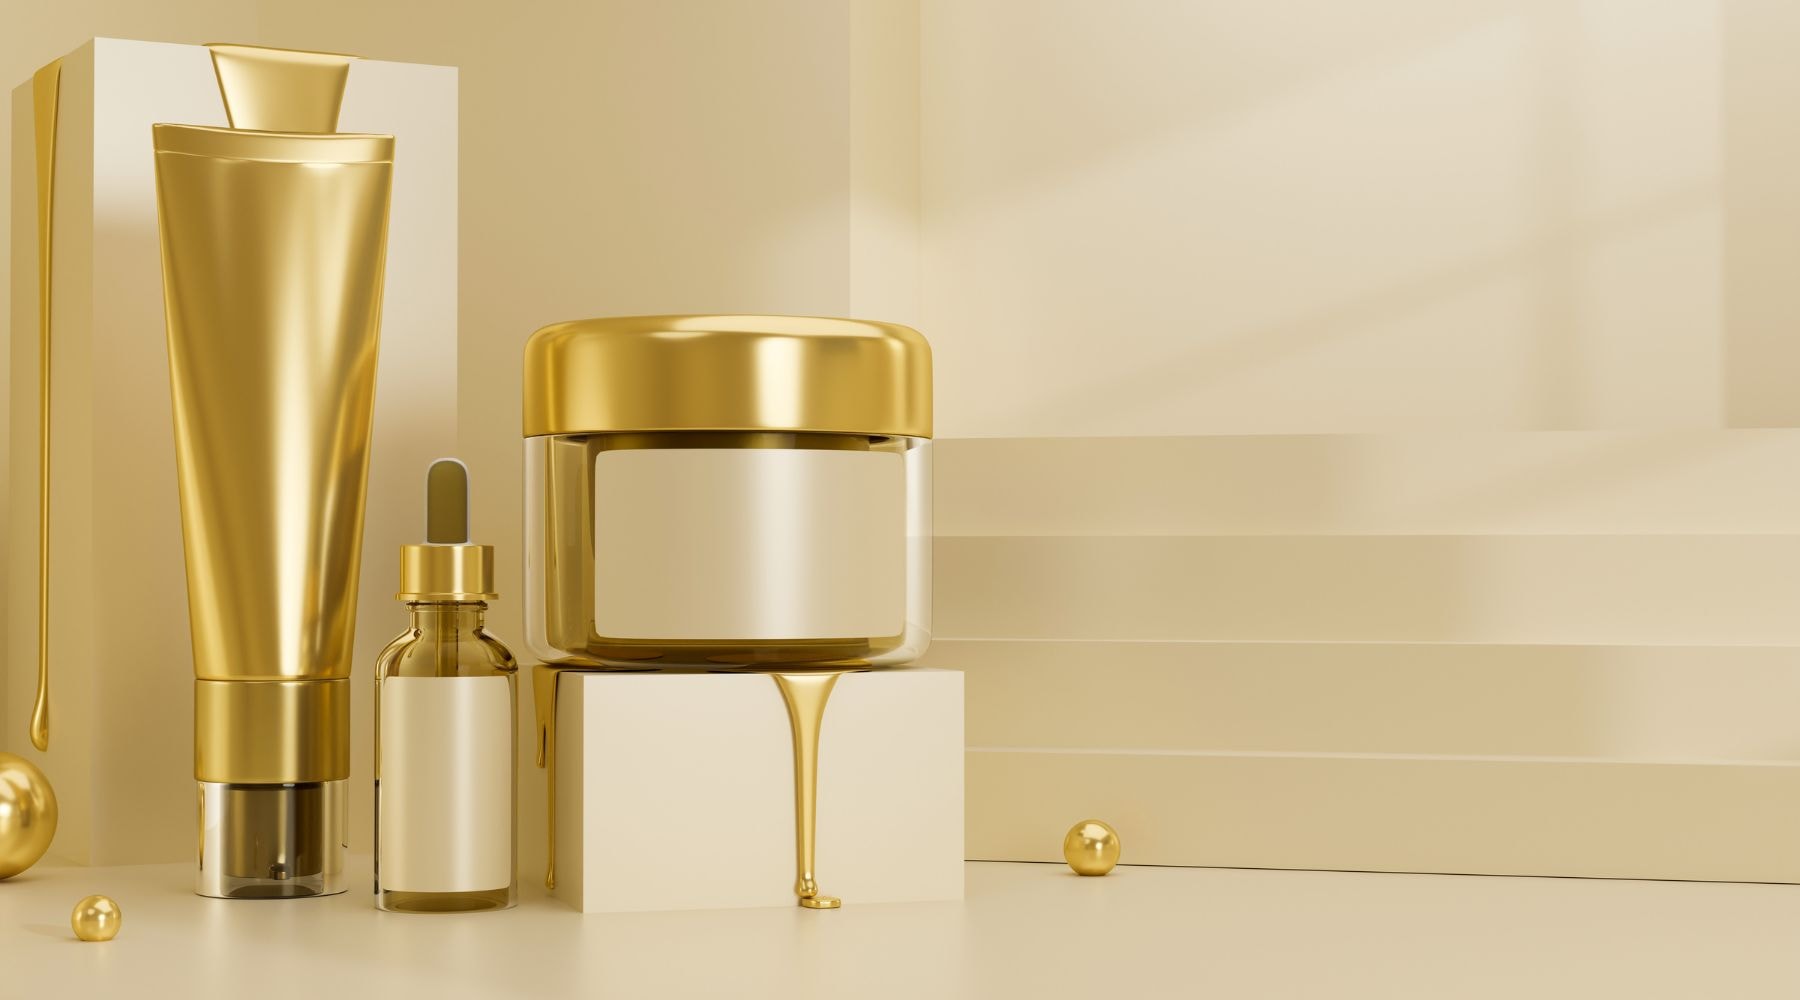 Luxury skincare products on a reflective gold surface, featuring a bottle, a tube, and a cream jar.